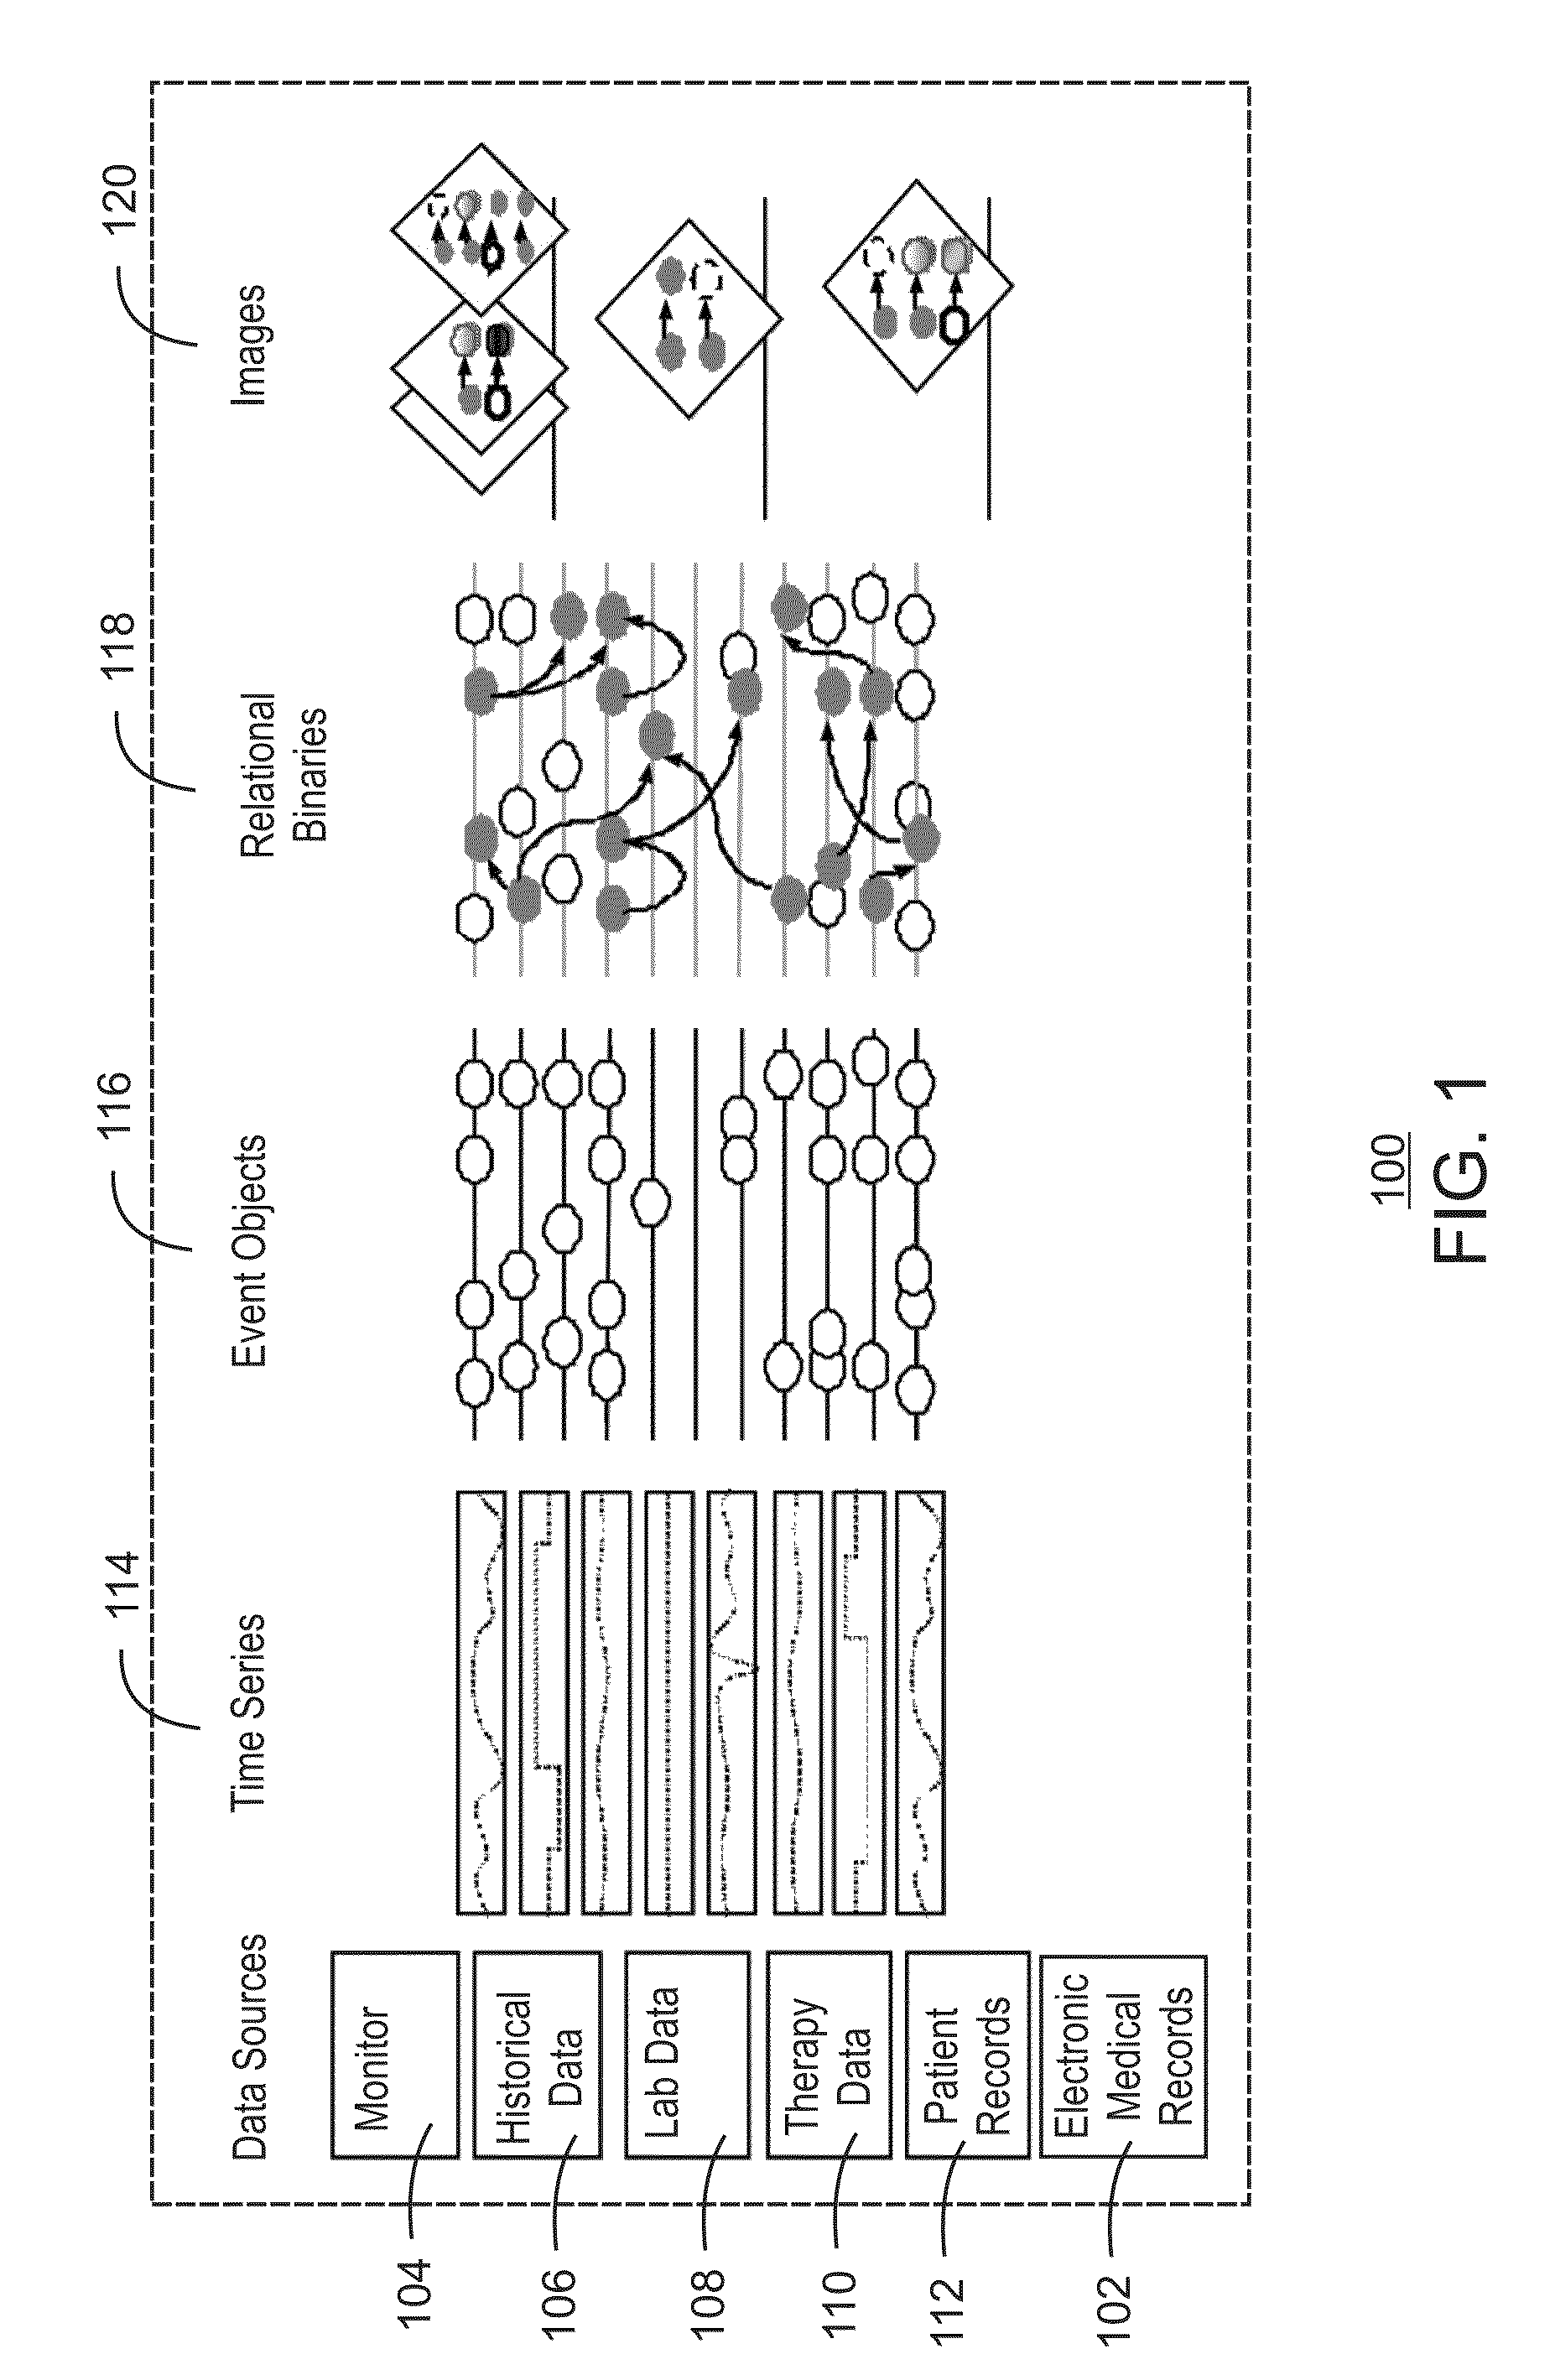 Real-time time series matrix pathophysiologic pattern processor and quality assessment method